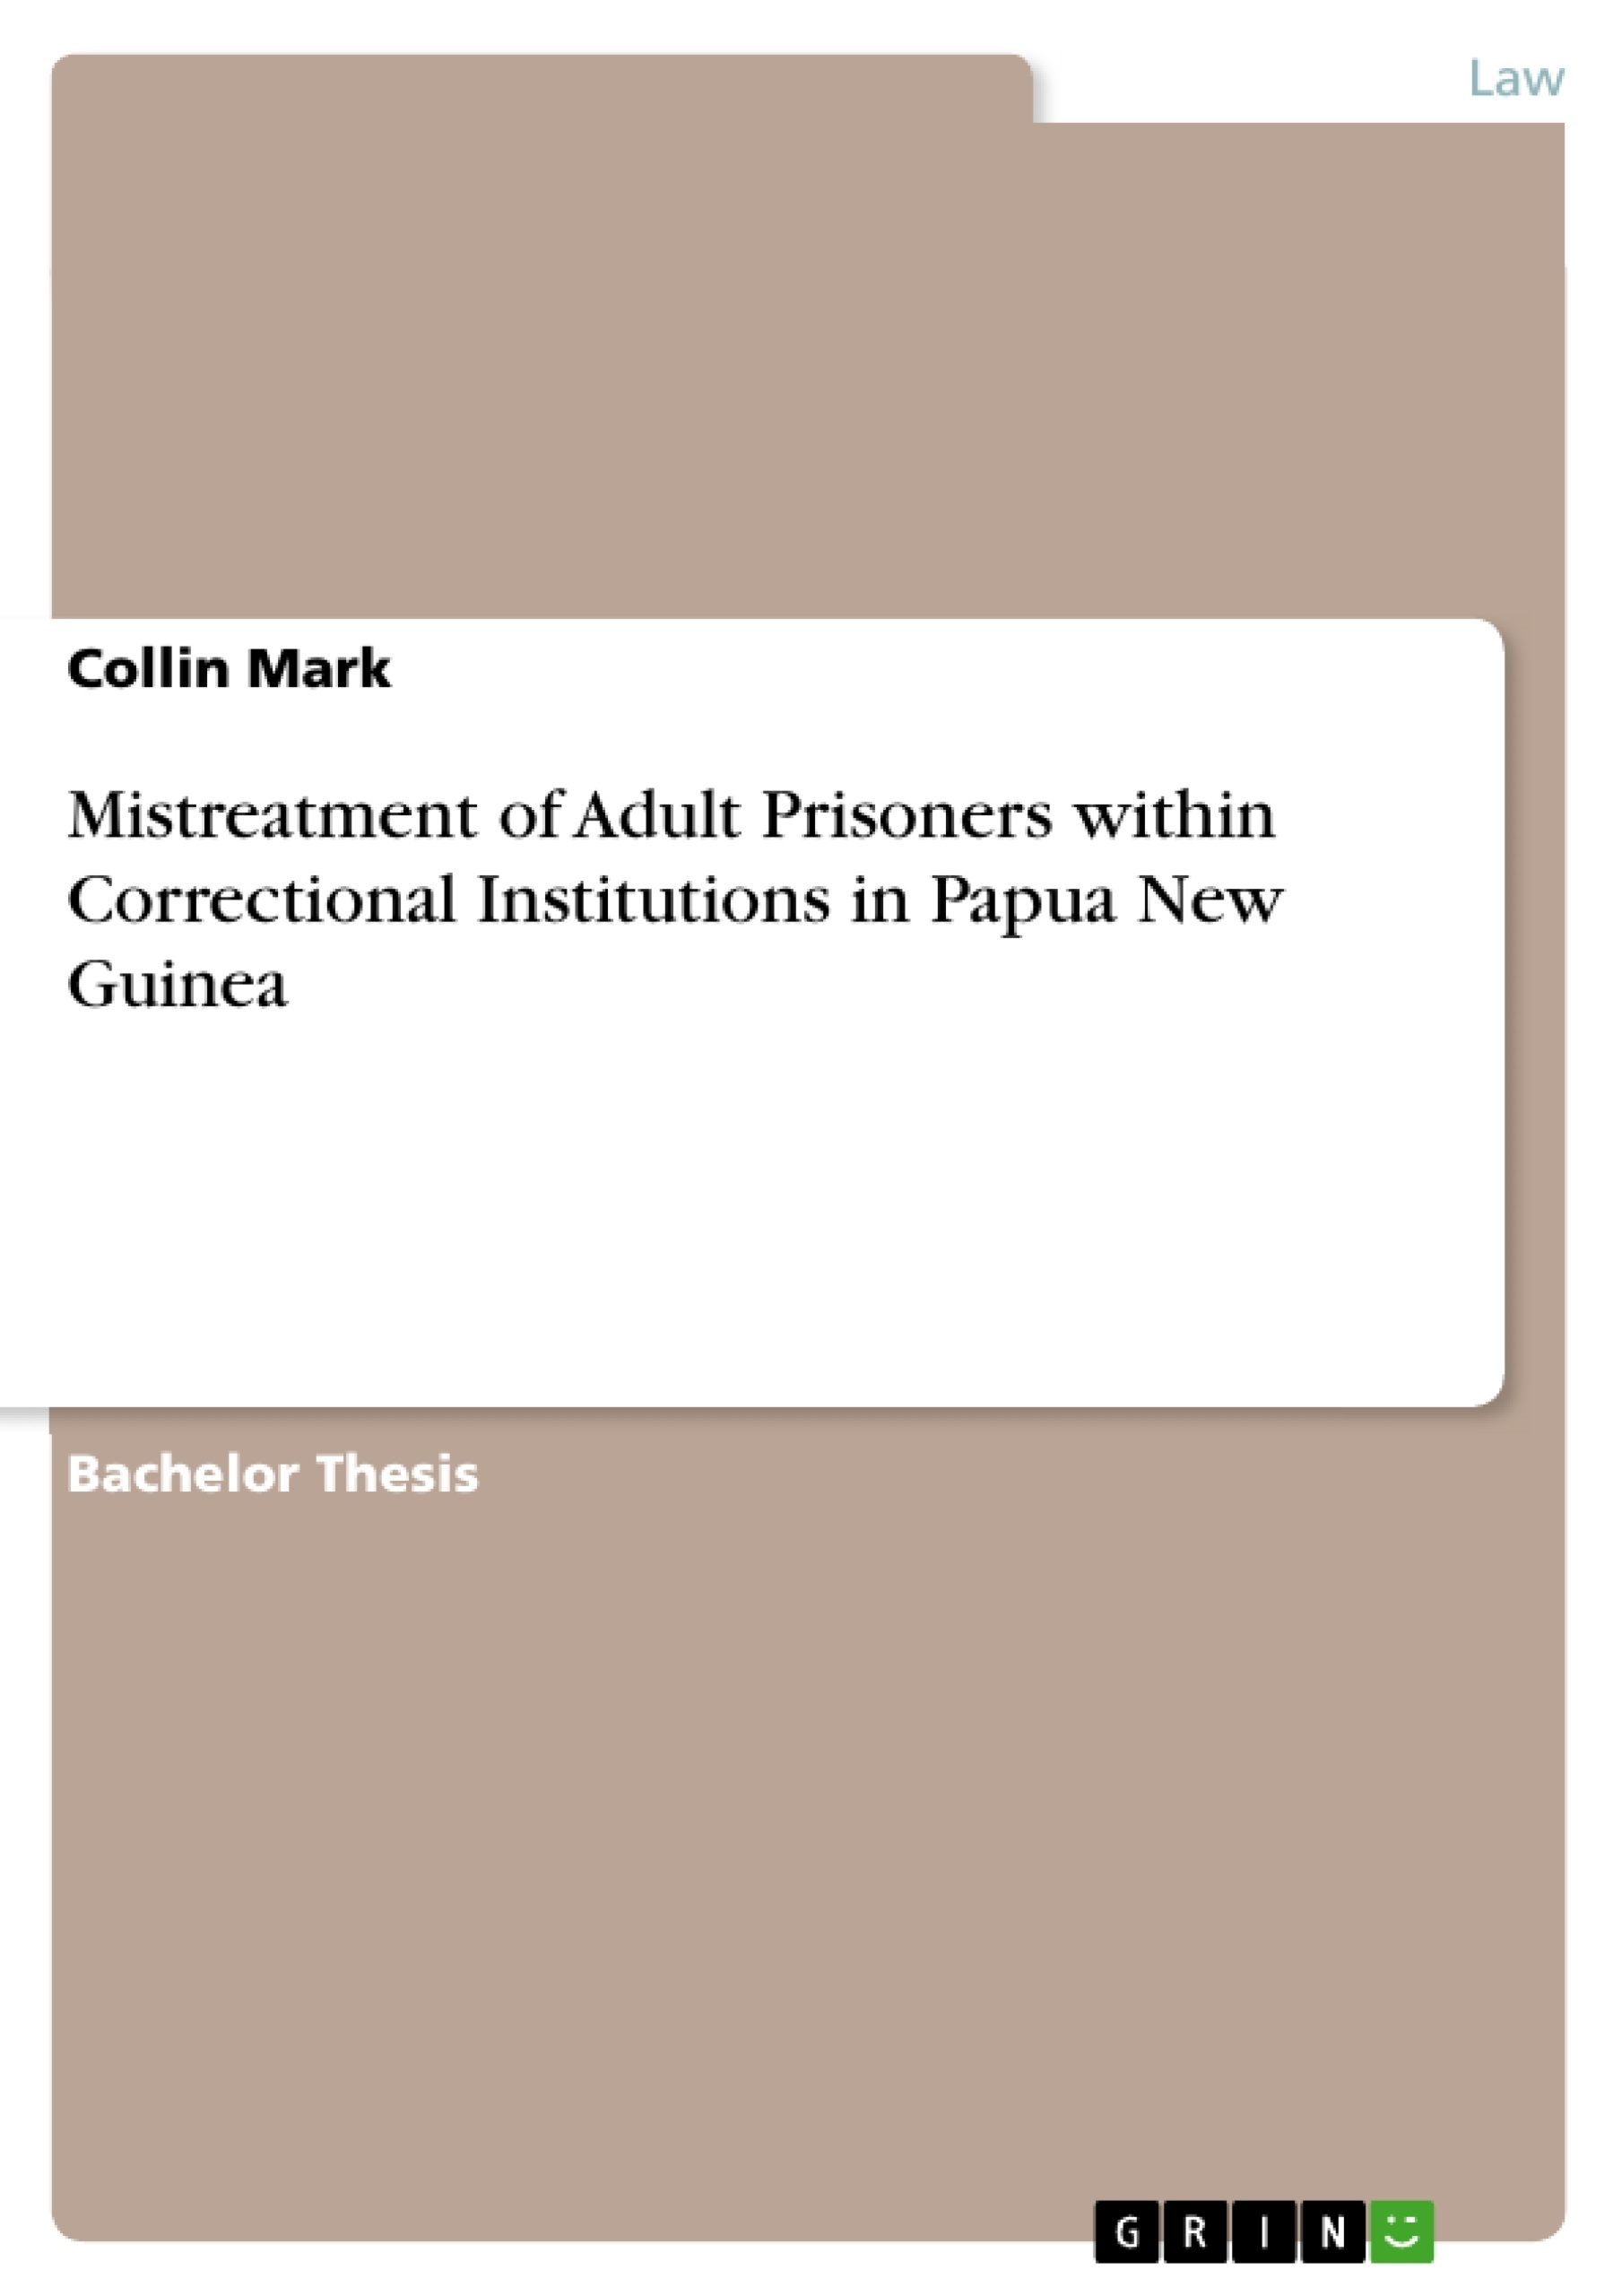 Title: Mistreatment of Adult Prisoners within Correctional Institutions in Papua New Guinea